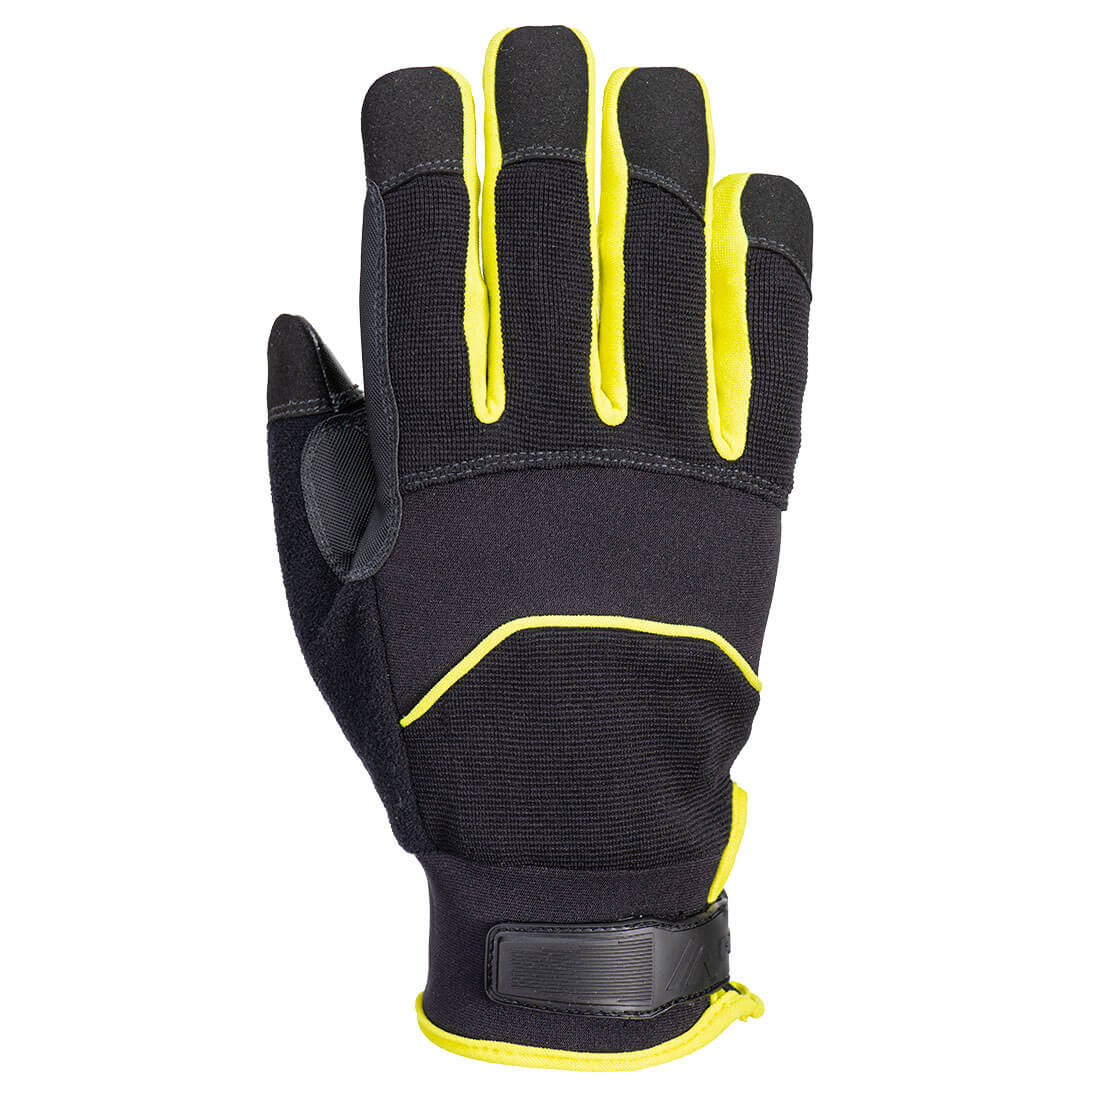 Needle Resistant Glove - Personal protection